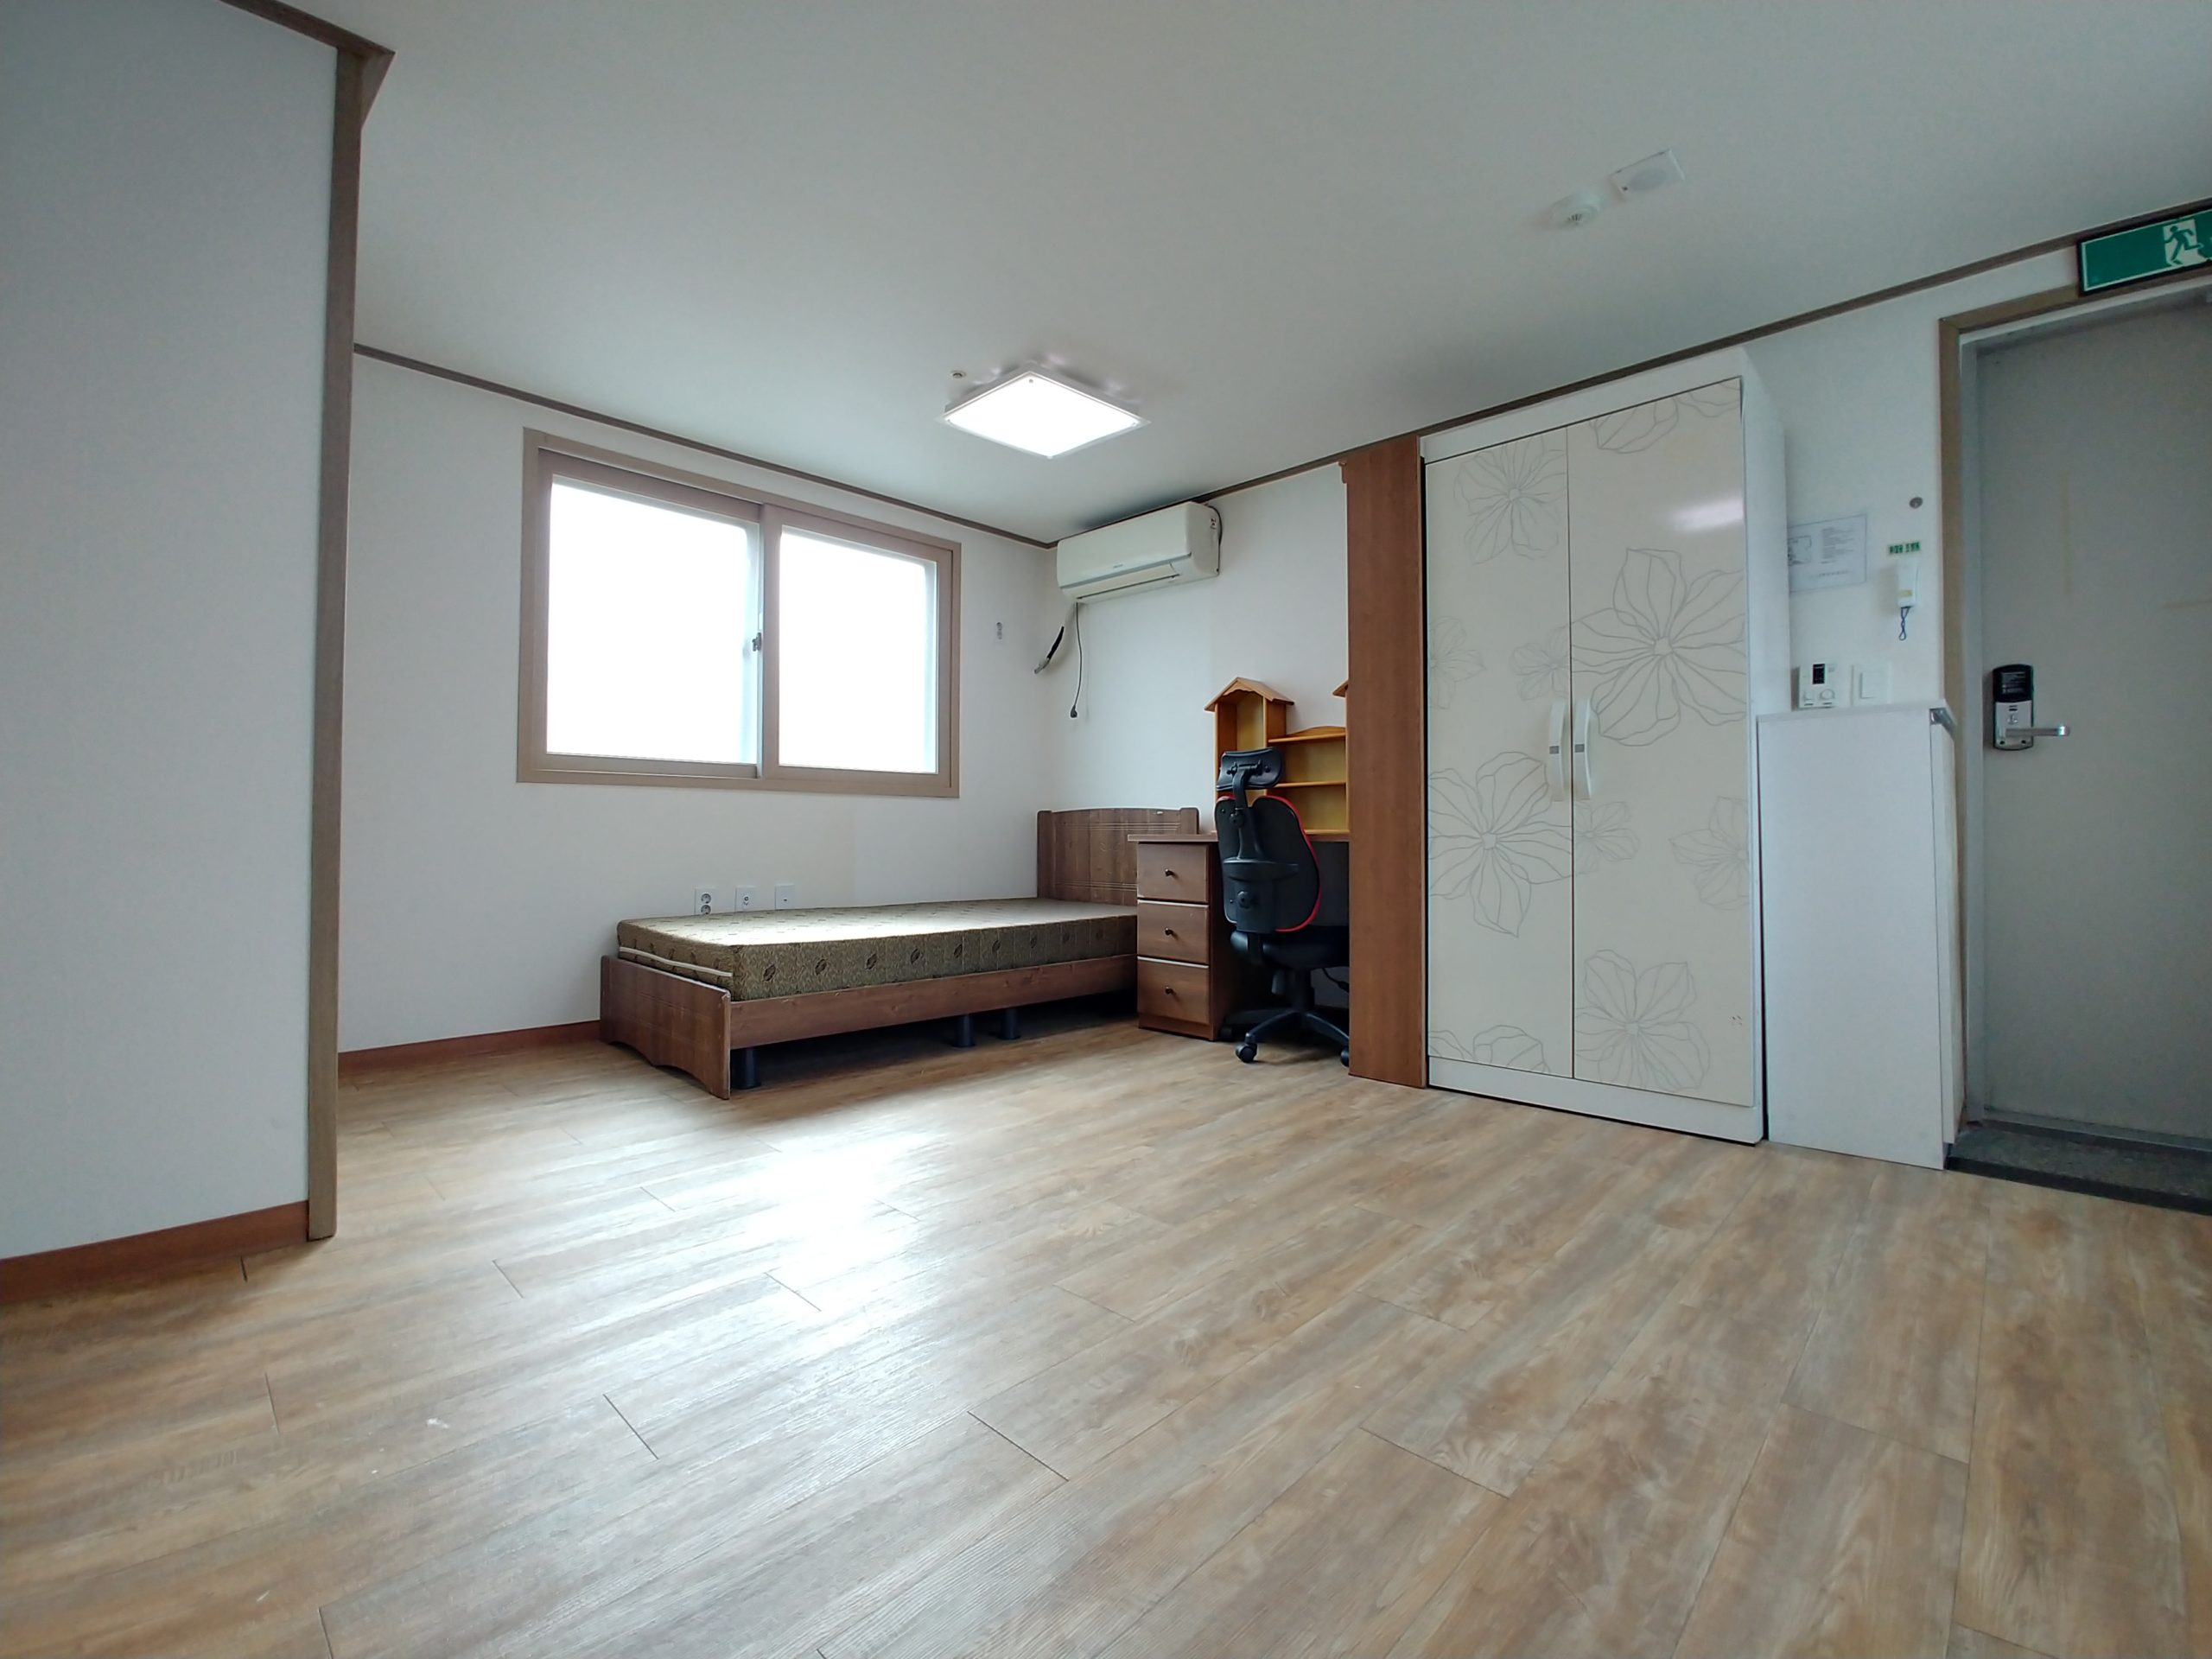 HANSUNG UNIVERSITY/ BOMUN STATION- 1000/60+5 LONG-TERM STUDIO (INCLUDED INTERNET&WATER FEES)